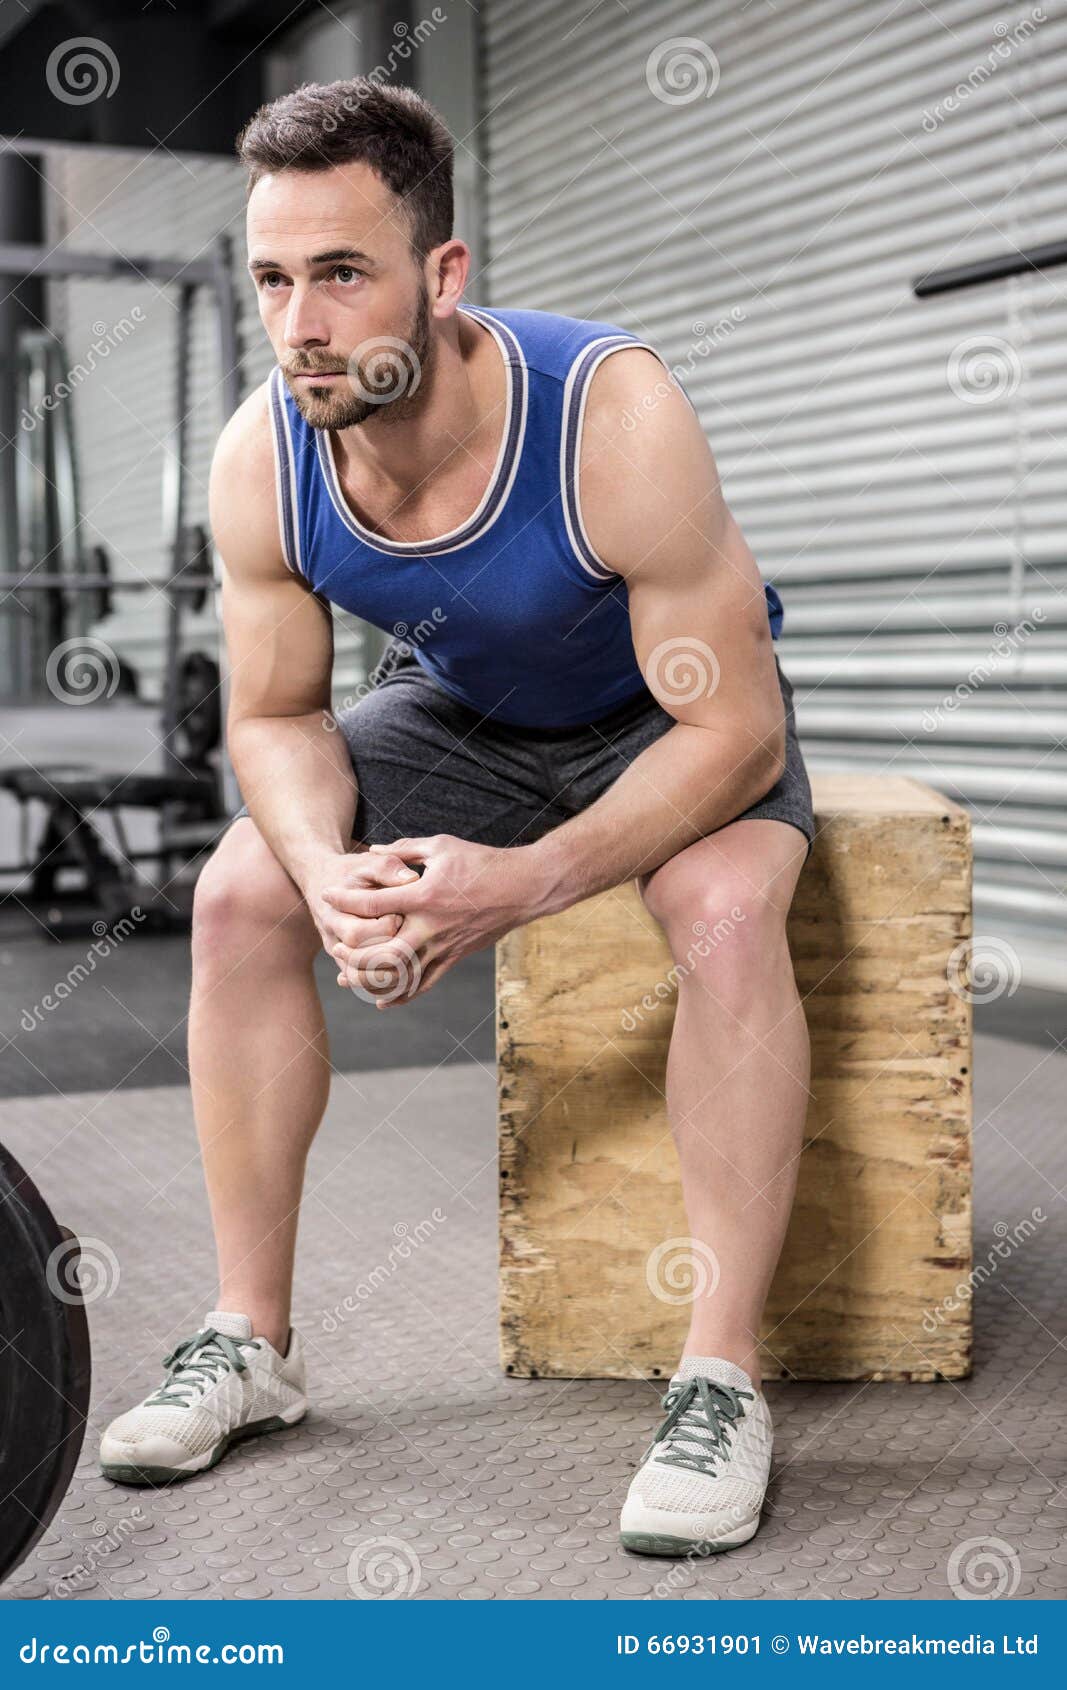 Muscular Man Sitting on Wooden Block Stock Image - Image of athletic ...